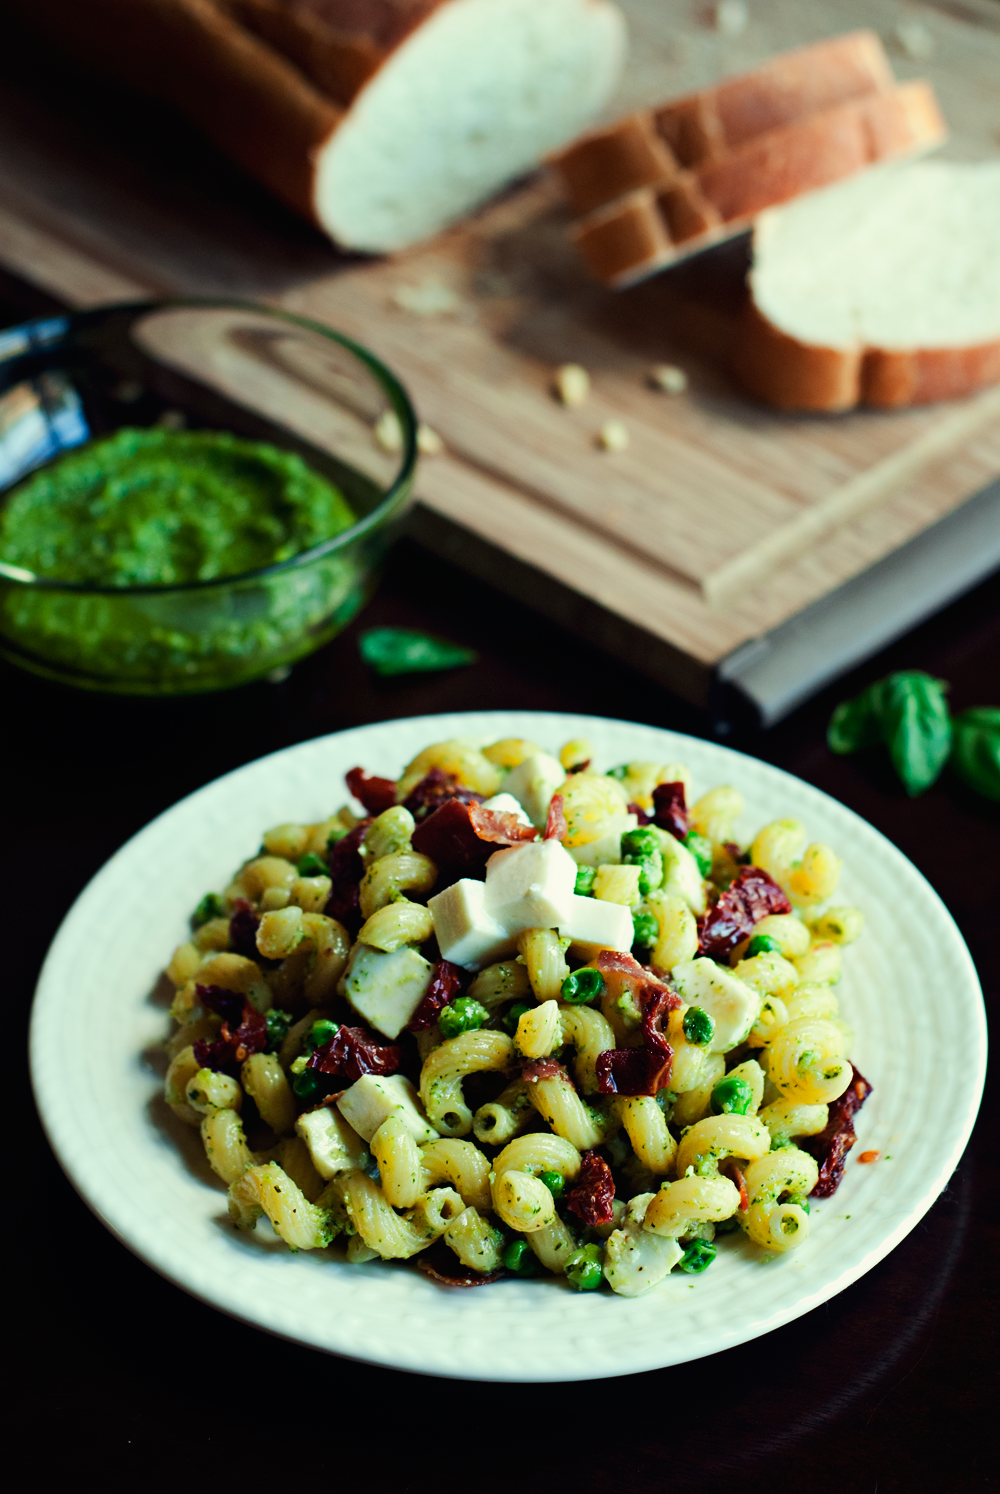 Pesto Pasta with Prosciutto, Peas, and Sun-Dried Tomatoes by Three in Three